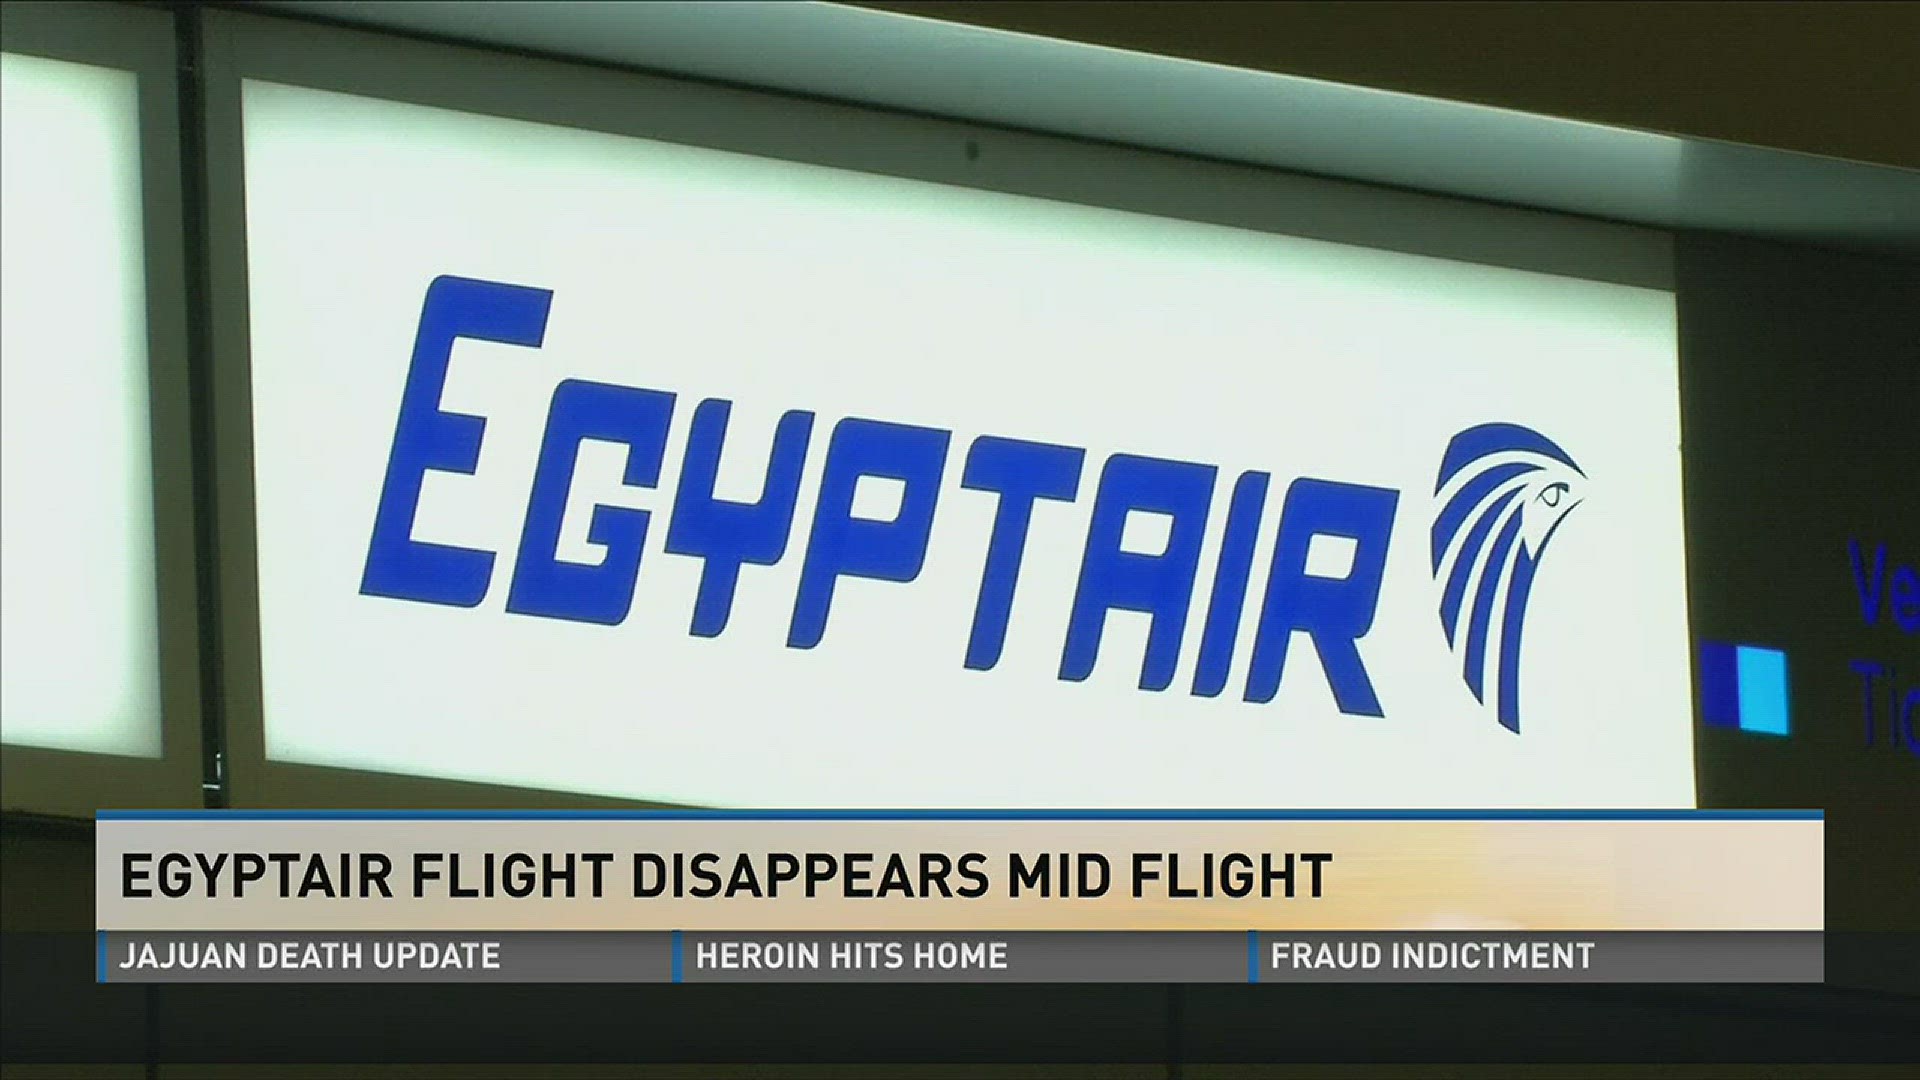 Search crews are looking for an EgyptAir flight  that disappeared from radar Wednesday night. The flight was traveling from Paris to Cairo.